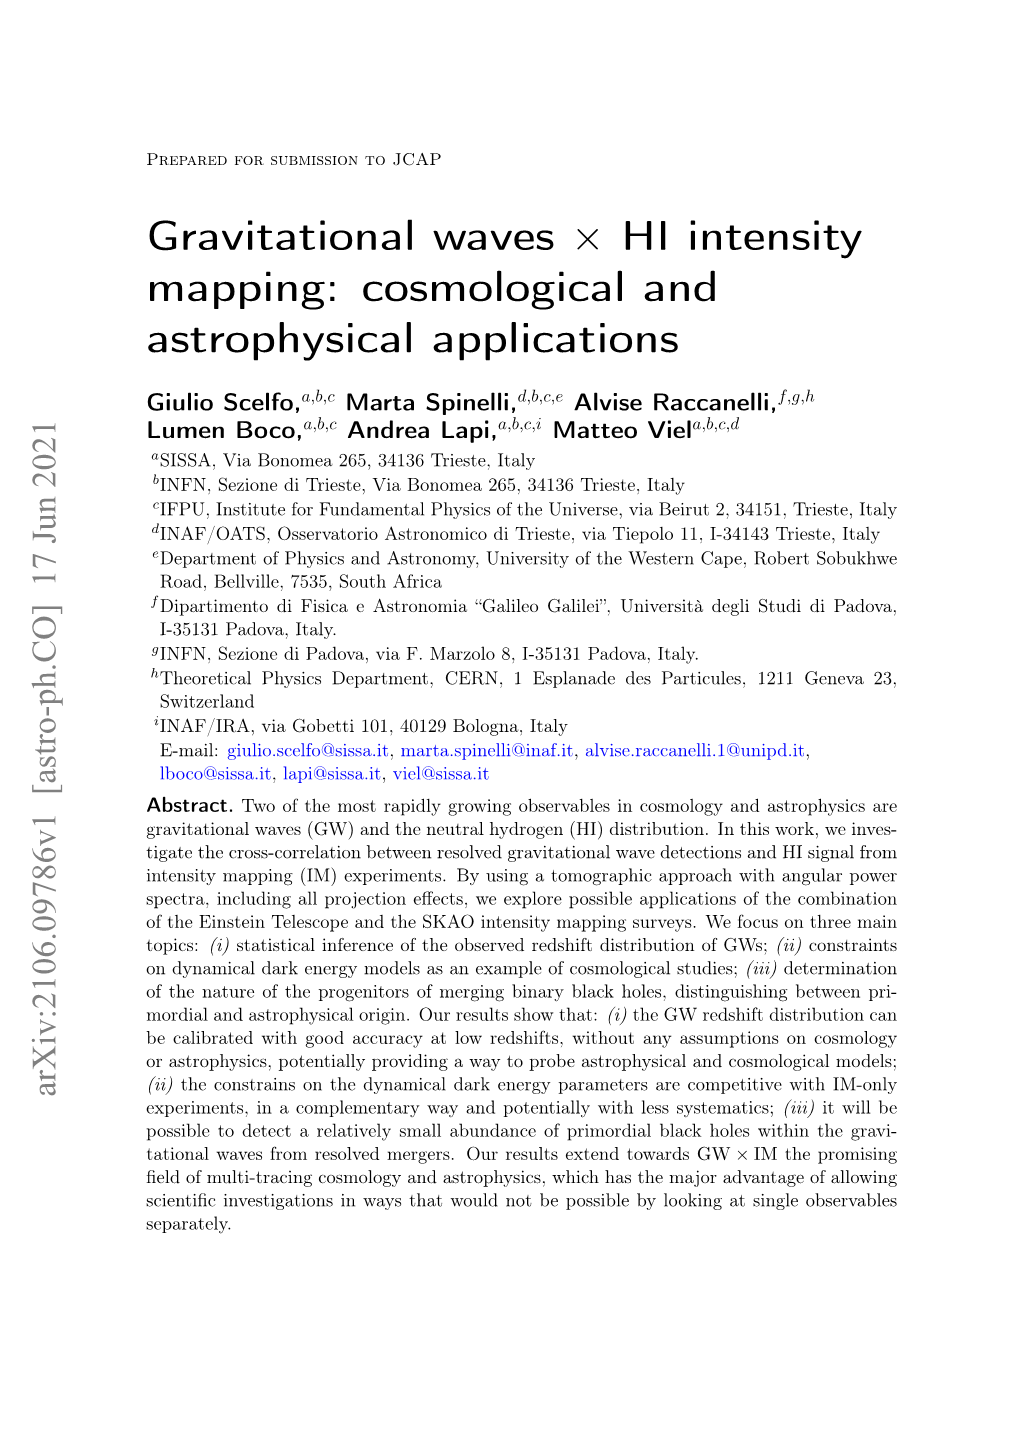 Arxiv: Gravitational Waves $\Times $ HI Intensity Mapping: Cosmological